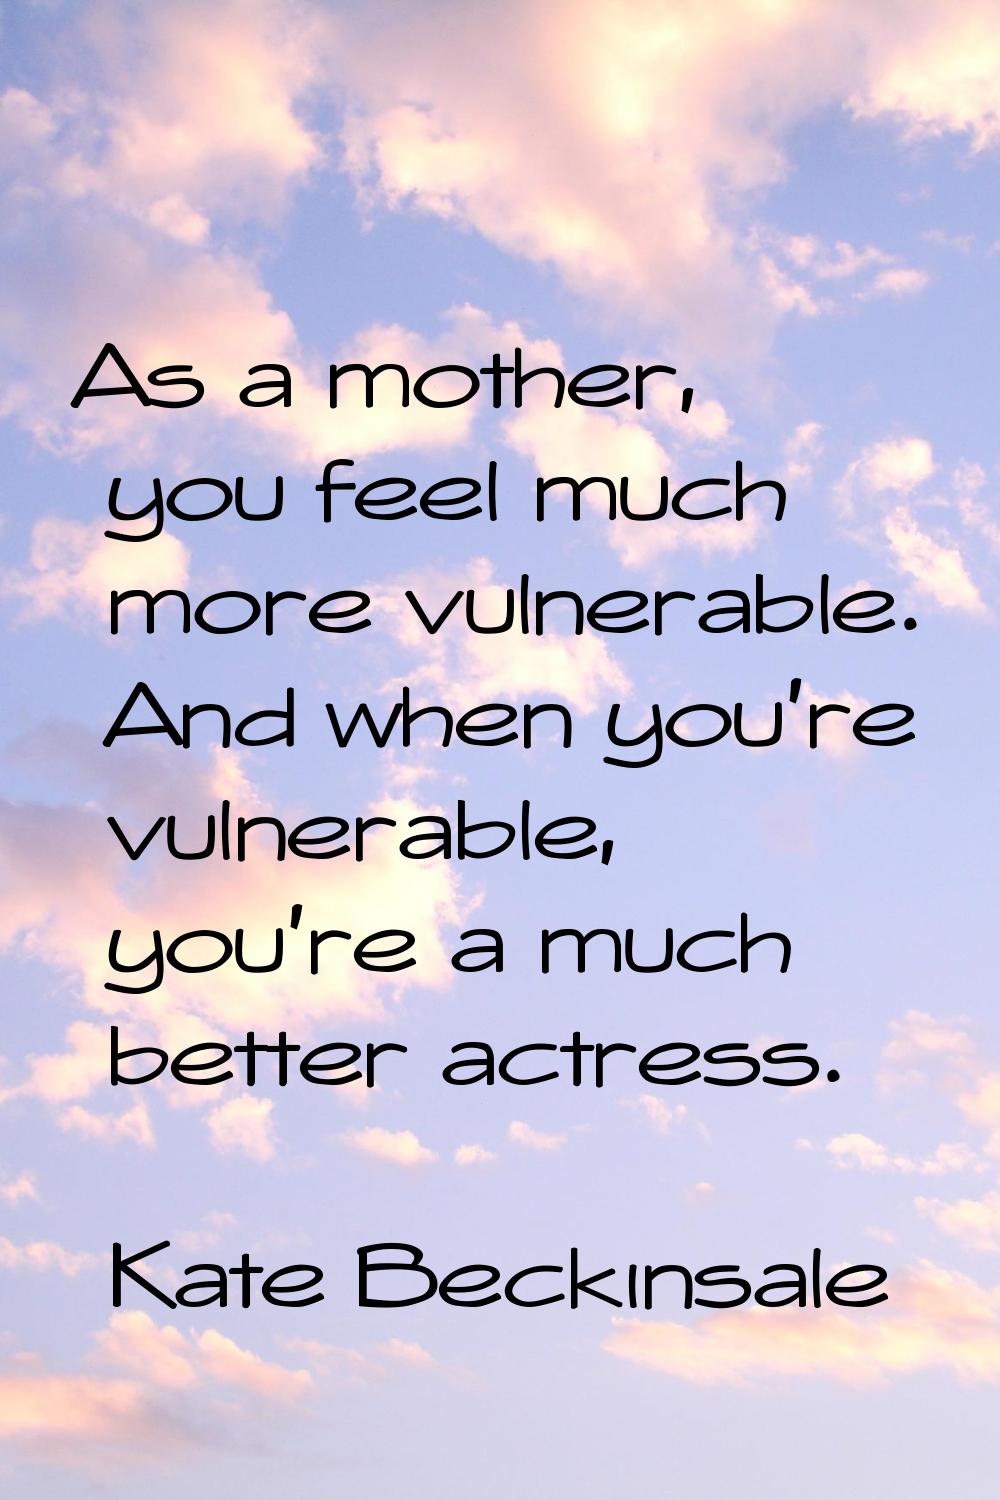 As a mother, you feel much more vulnerable. And when you're vulnerable, you're a much better actres